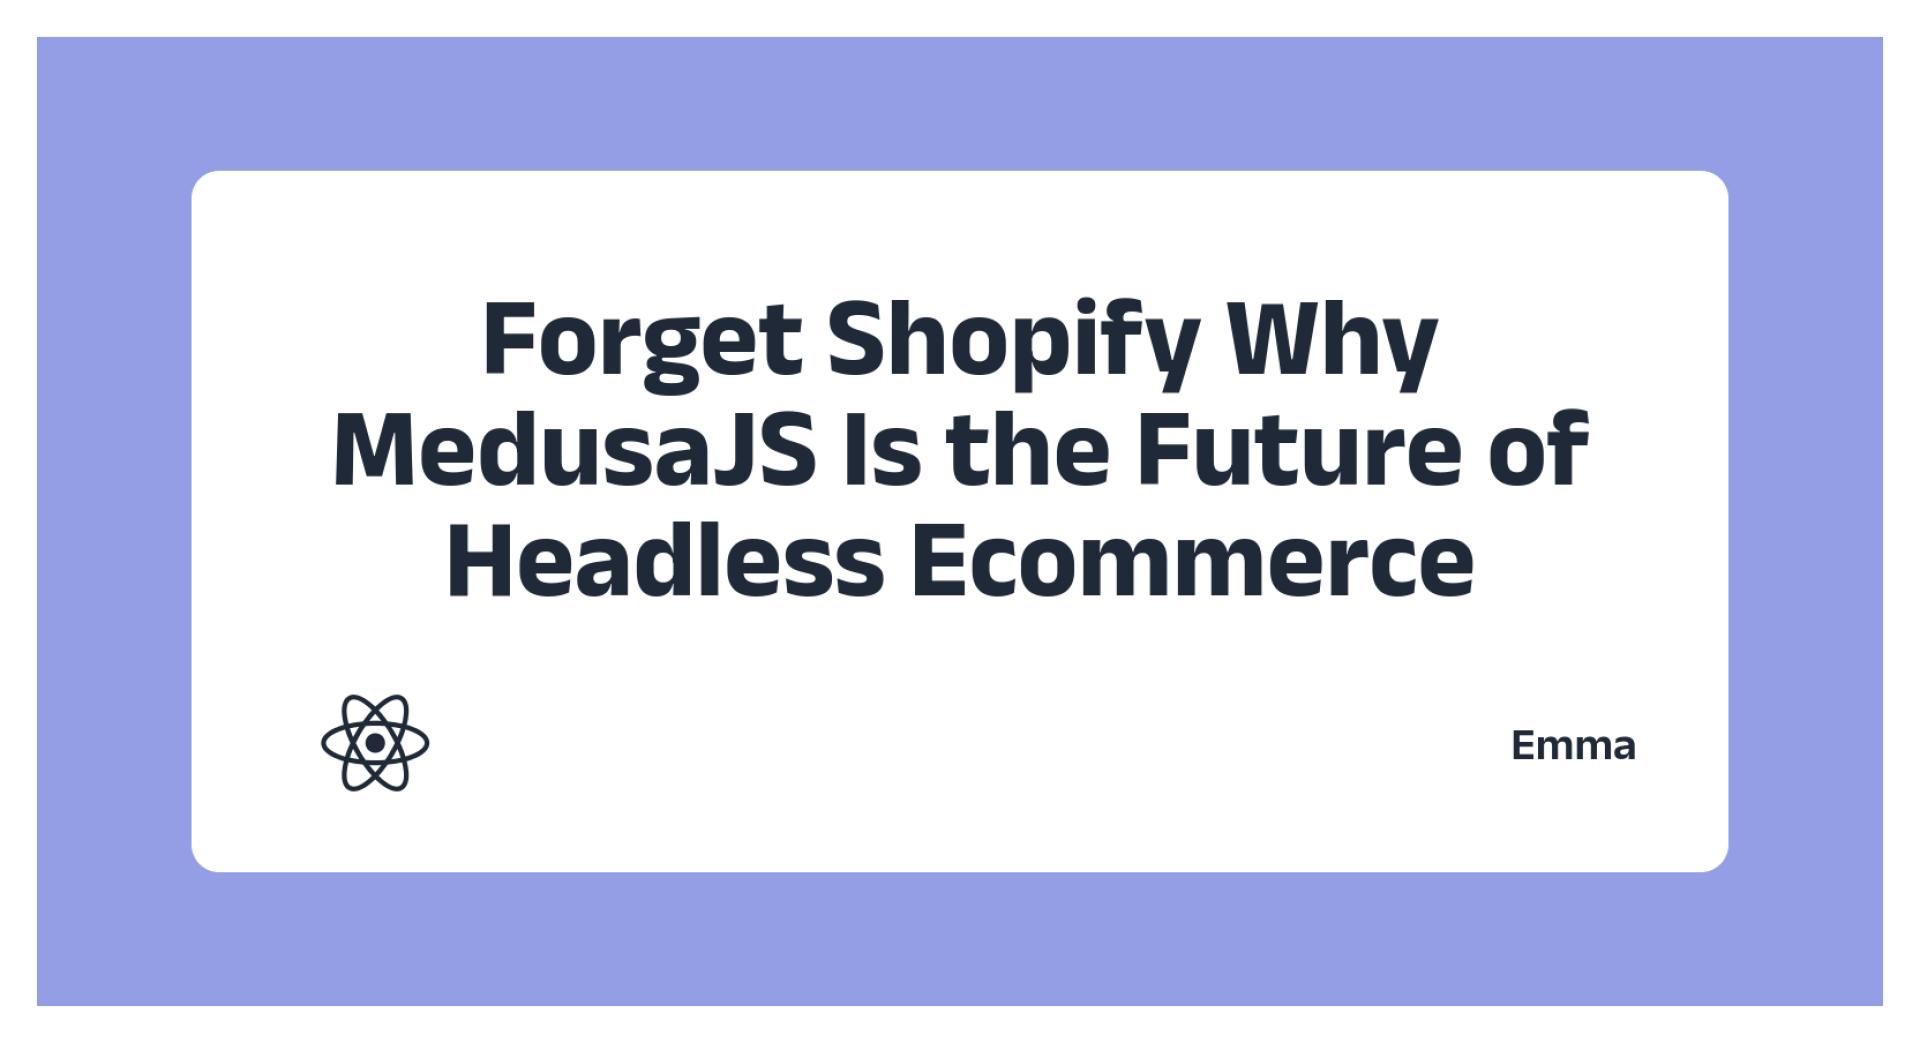 Forget Shopify: Why MedusaJS Is the Future of Headless Ecommerce